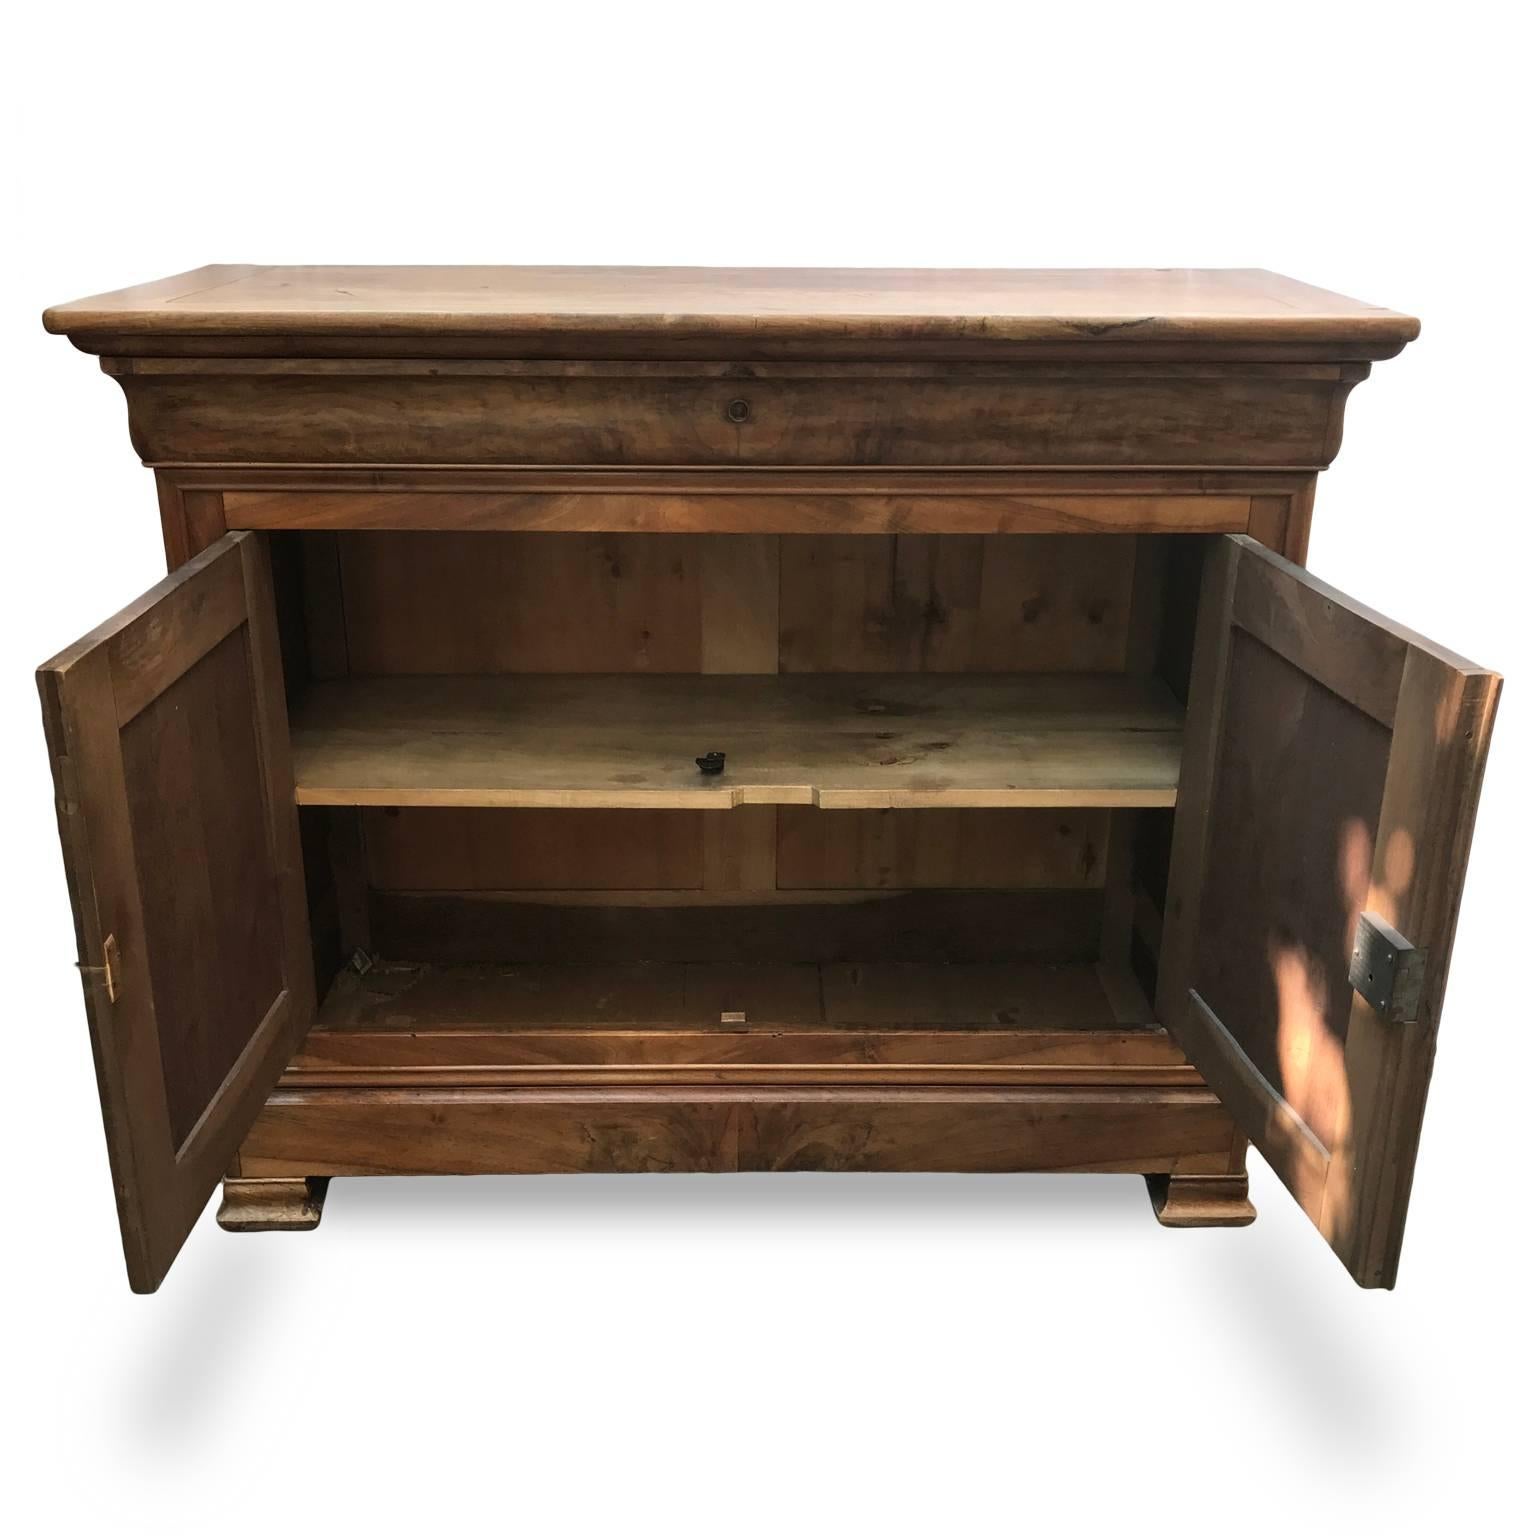 This stunning flame walnut two-door sideboard dates back to circa 1870, it is a French antique buffet coming from a private residence in Milan and it is in good age related condition with a beautiful glow and patina.
It features one large drawer